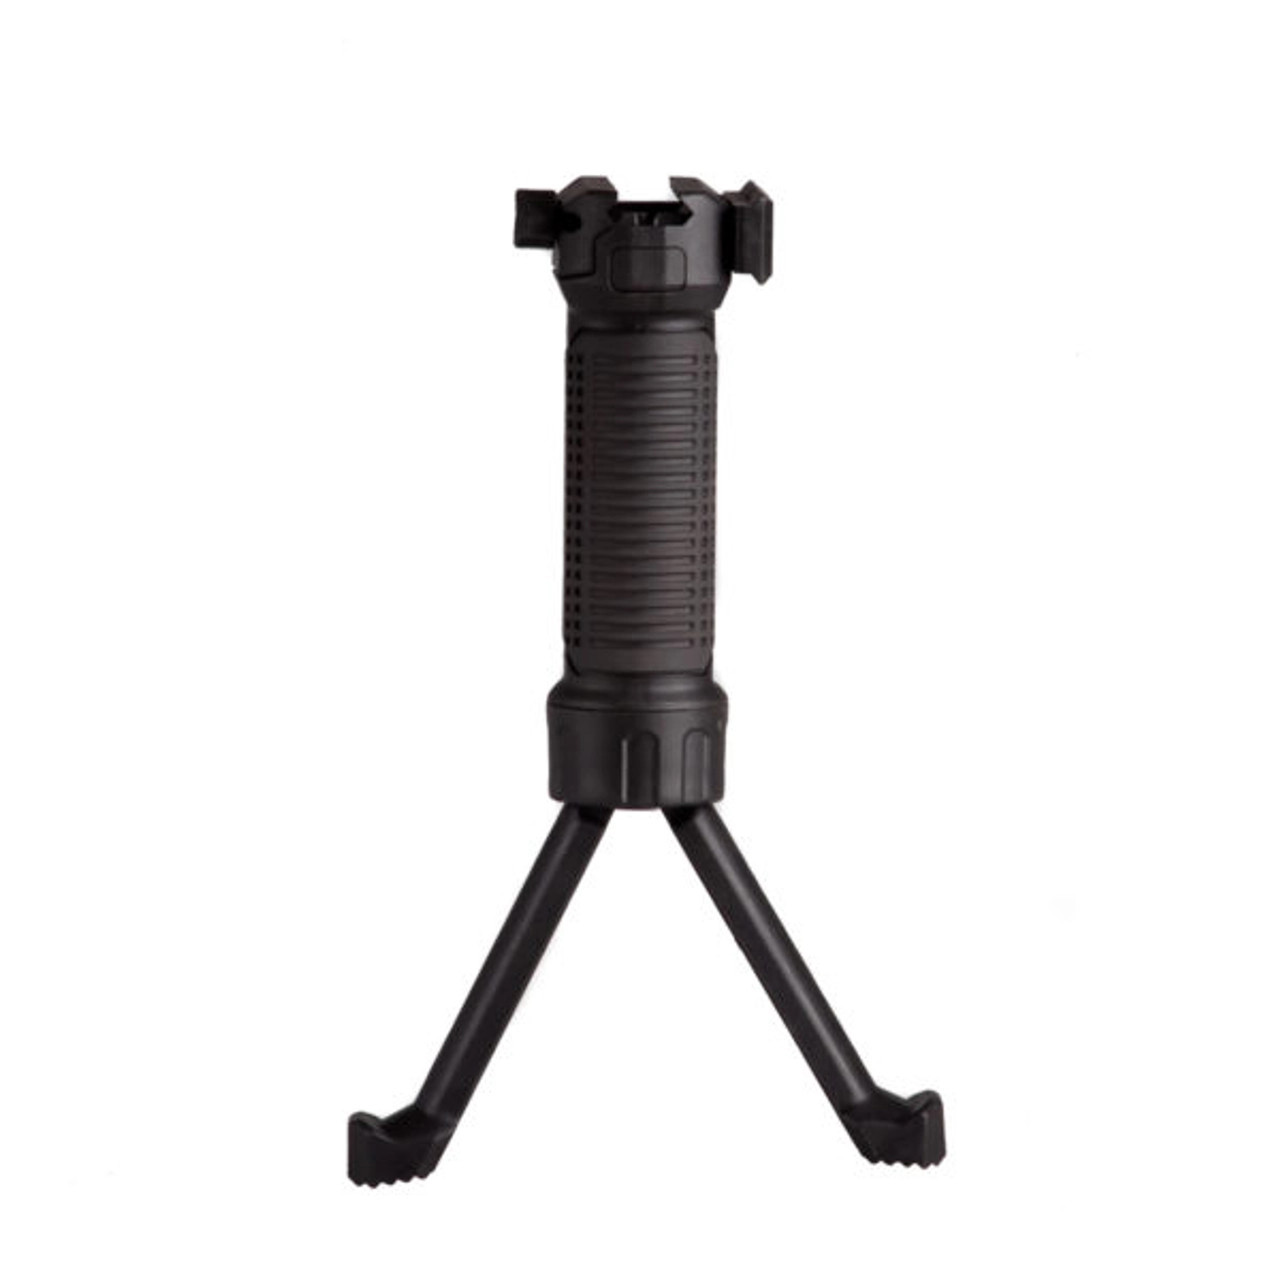 EBF POLYMER ENHANCED BIPOD FOREGRIP
IMI-EBF1


The IMI Defense EBF Polymer Enhanced Bipod Foregrip transforms fast from a vertical grip to a Bipod by the push of the thumb release button.
The EBF Bipod designed especially to fulfill its mission and stand reliable in the roughest conditions. An Ergonomic Bipod with a rubberized grip made for heavy-duty rifles due to its superior design and strength, made with a Picatinny rail allowing an optimal mounting solution. The EBP Bipod provides a solid and comfortable grip and is highly recommended for stability.
 
Features & benefits:
Made of the high-temperature resistant polymer compound
Mill standard
Strong & solid mechanism spring and legs
Reliable in rough conditions, such as mud, sand, and rain
Comes as standard with a removable Picatinny Rail
Easily adjusted to a Picatinny rail
Easy and fast to operate, thumb push-button for a quick release
Secured with Dual Quick-Release Wingnuts
Quick & easy installation, no gunsmith required
 
Made in Israel